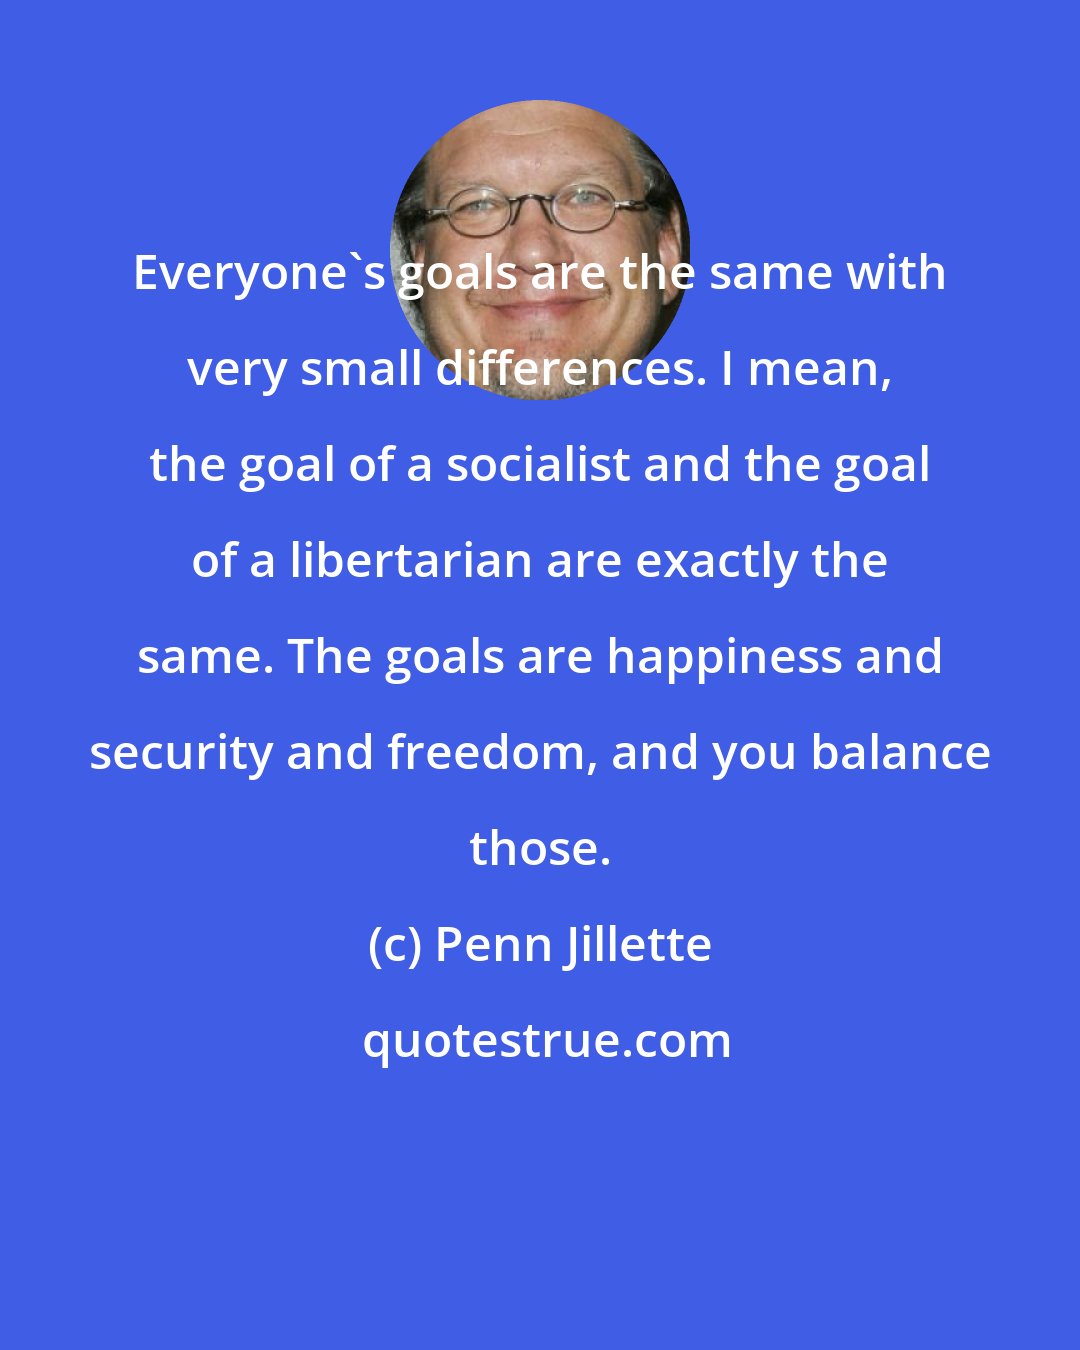 Penn Jillette: Everyone's goals are the same with very small differences. I mean, the goal of a socialist and the goal of a libertarian are exactly the same. The goals are happiness and security and freedom, and you balance those.